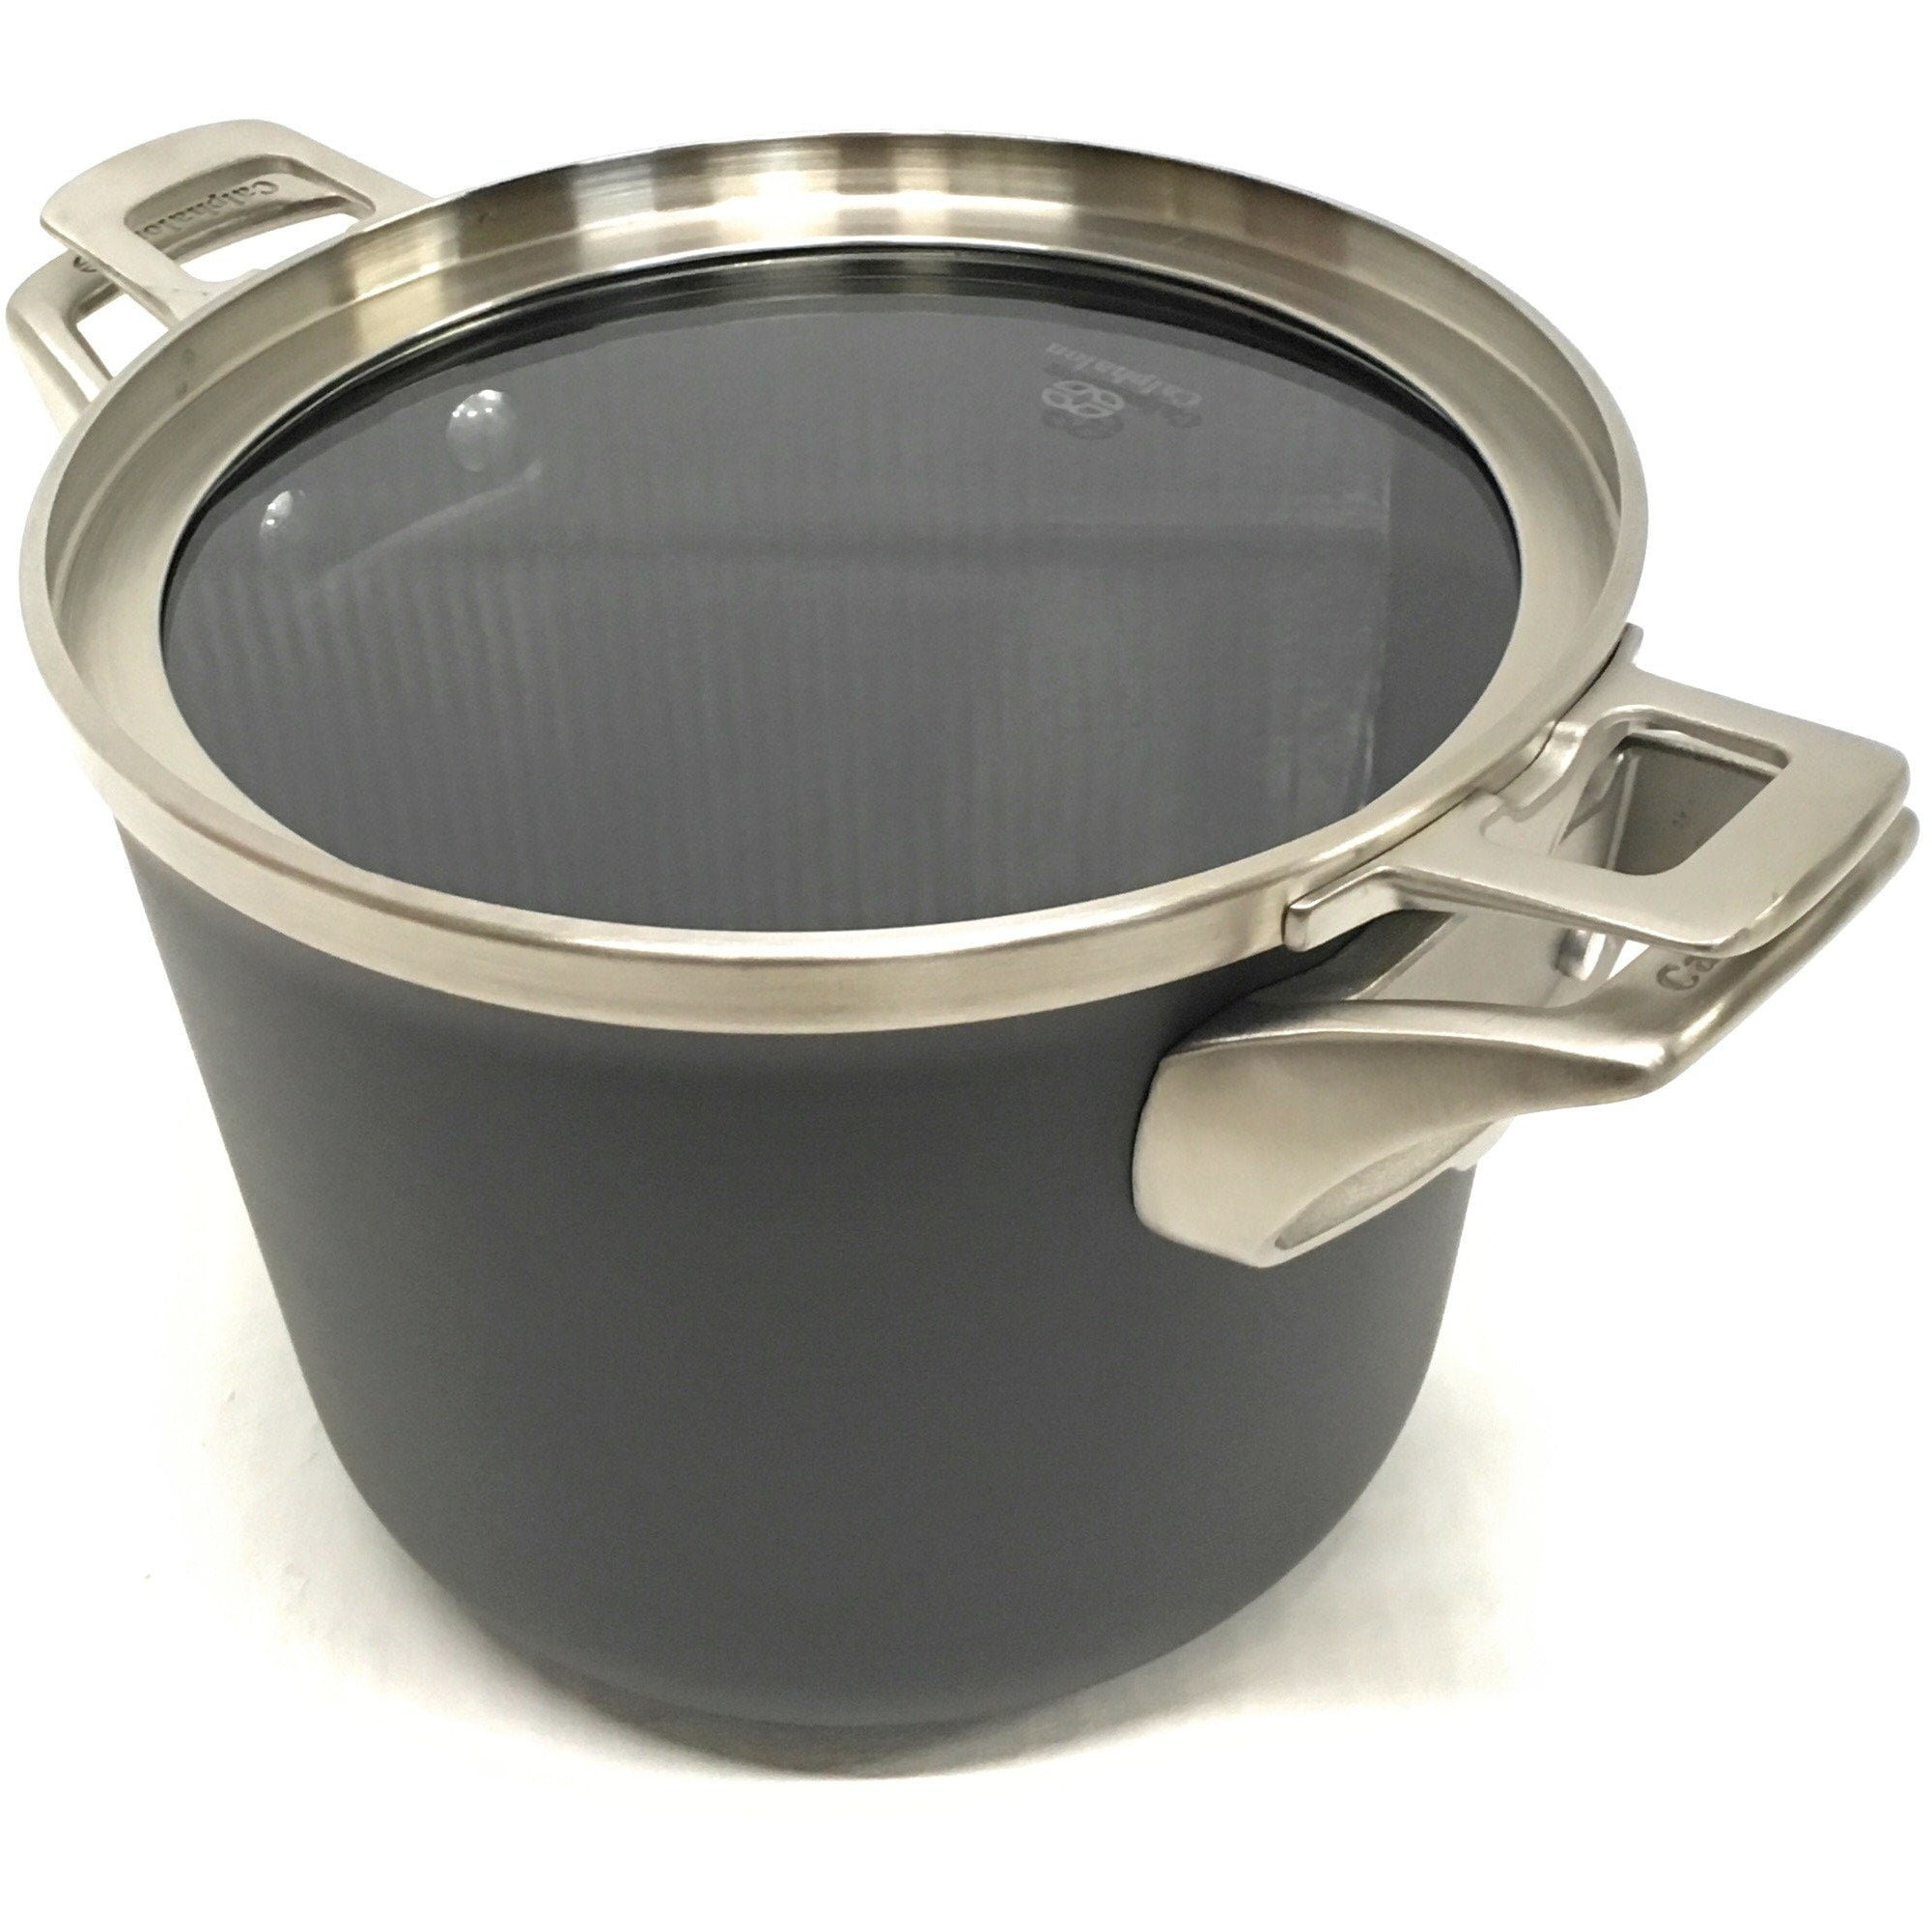 Details about   12 Quart Covered Stock Pot Oven Dishwasher Safe Tempered Glass Lid Nonstick Gray 